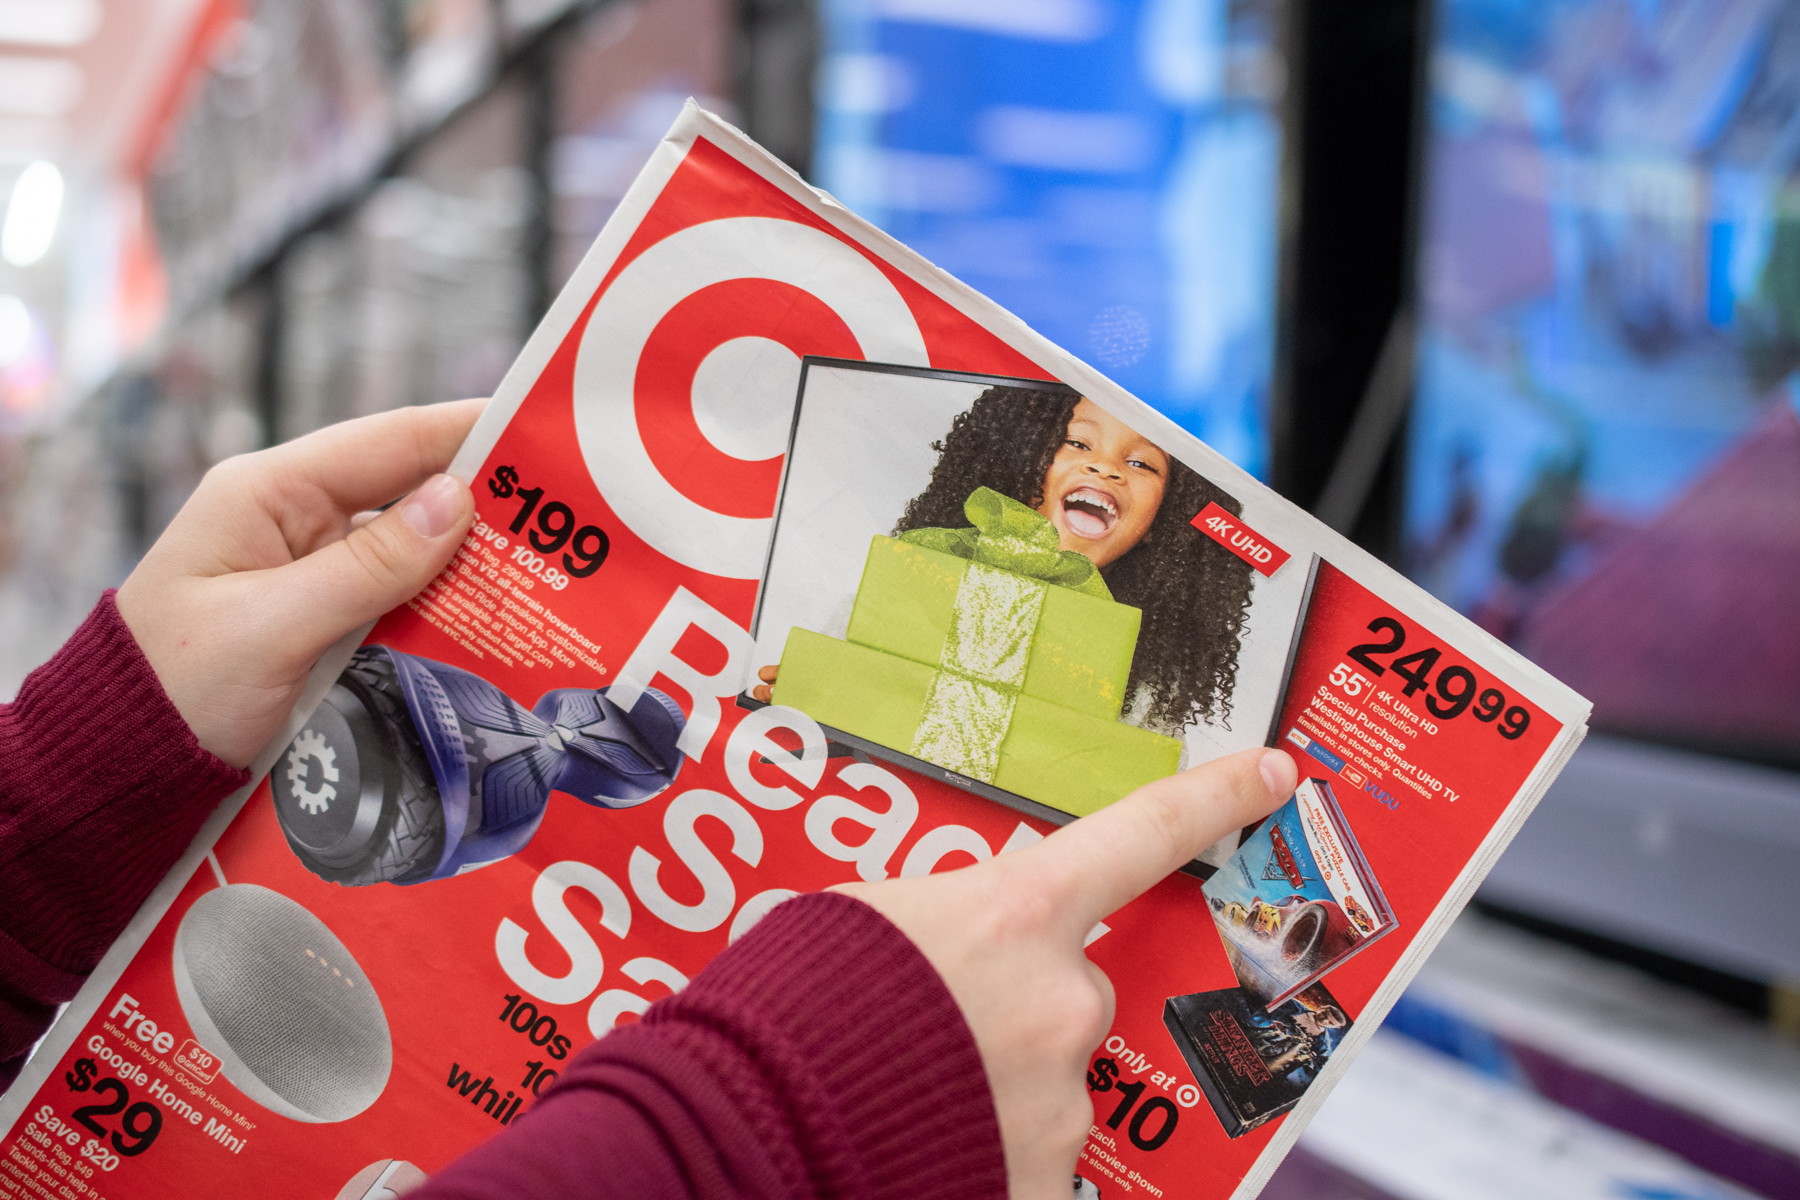 target toy deal of the day list 2018